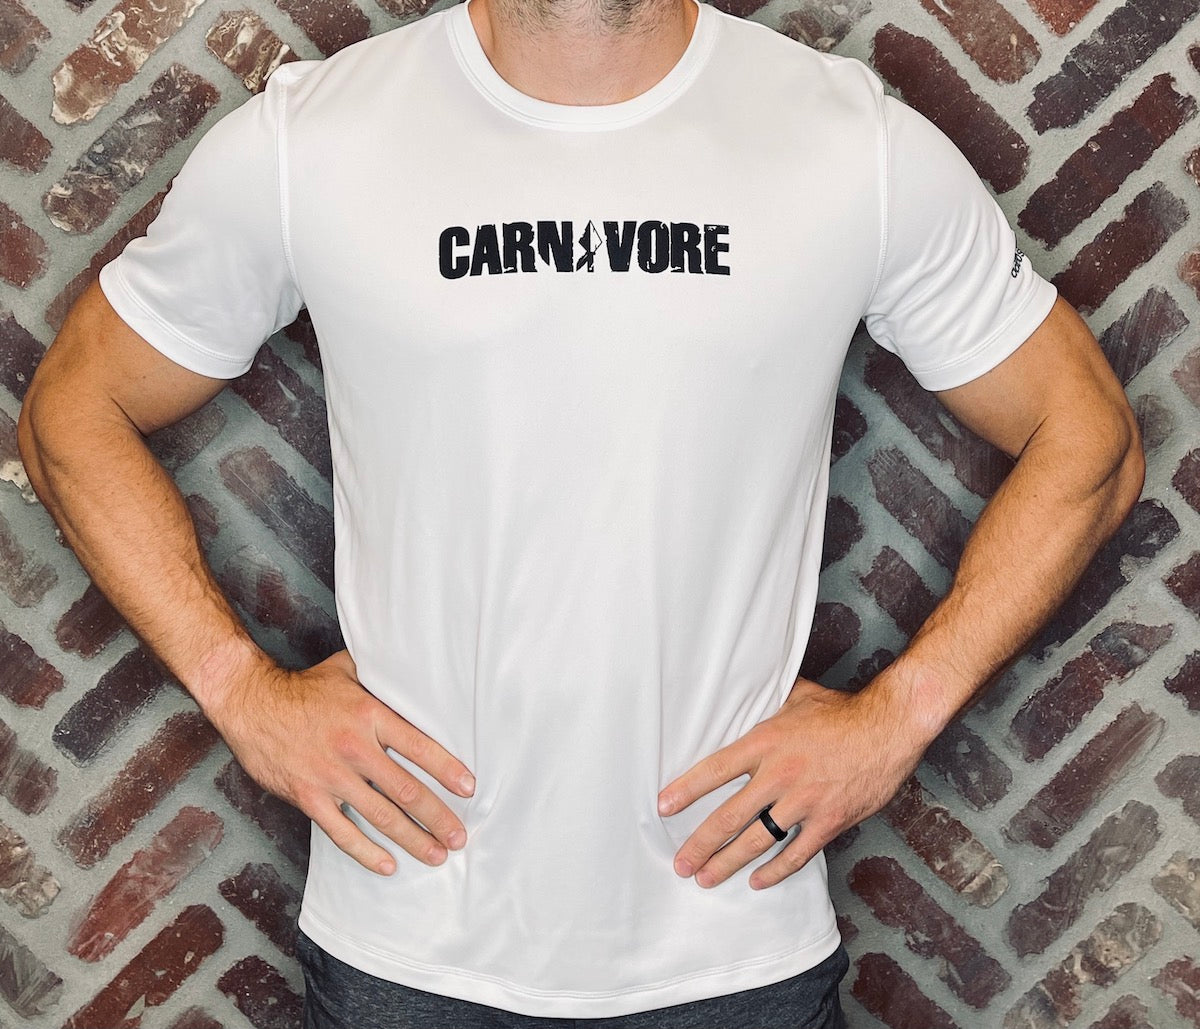 MK Supplements CARNIVORE T-Shirt in White.